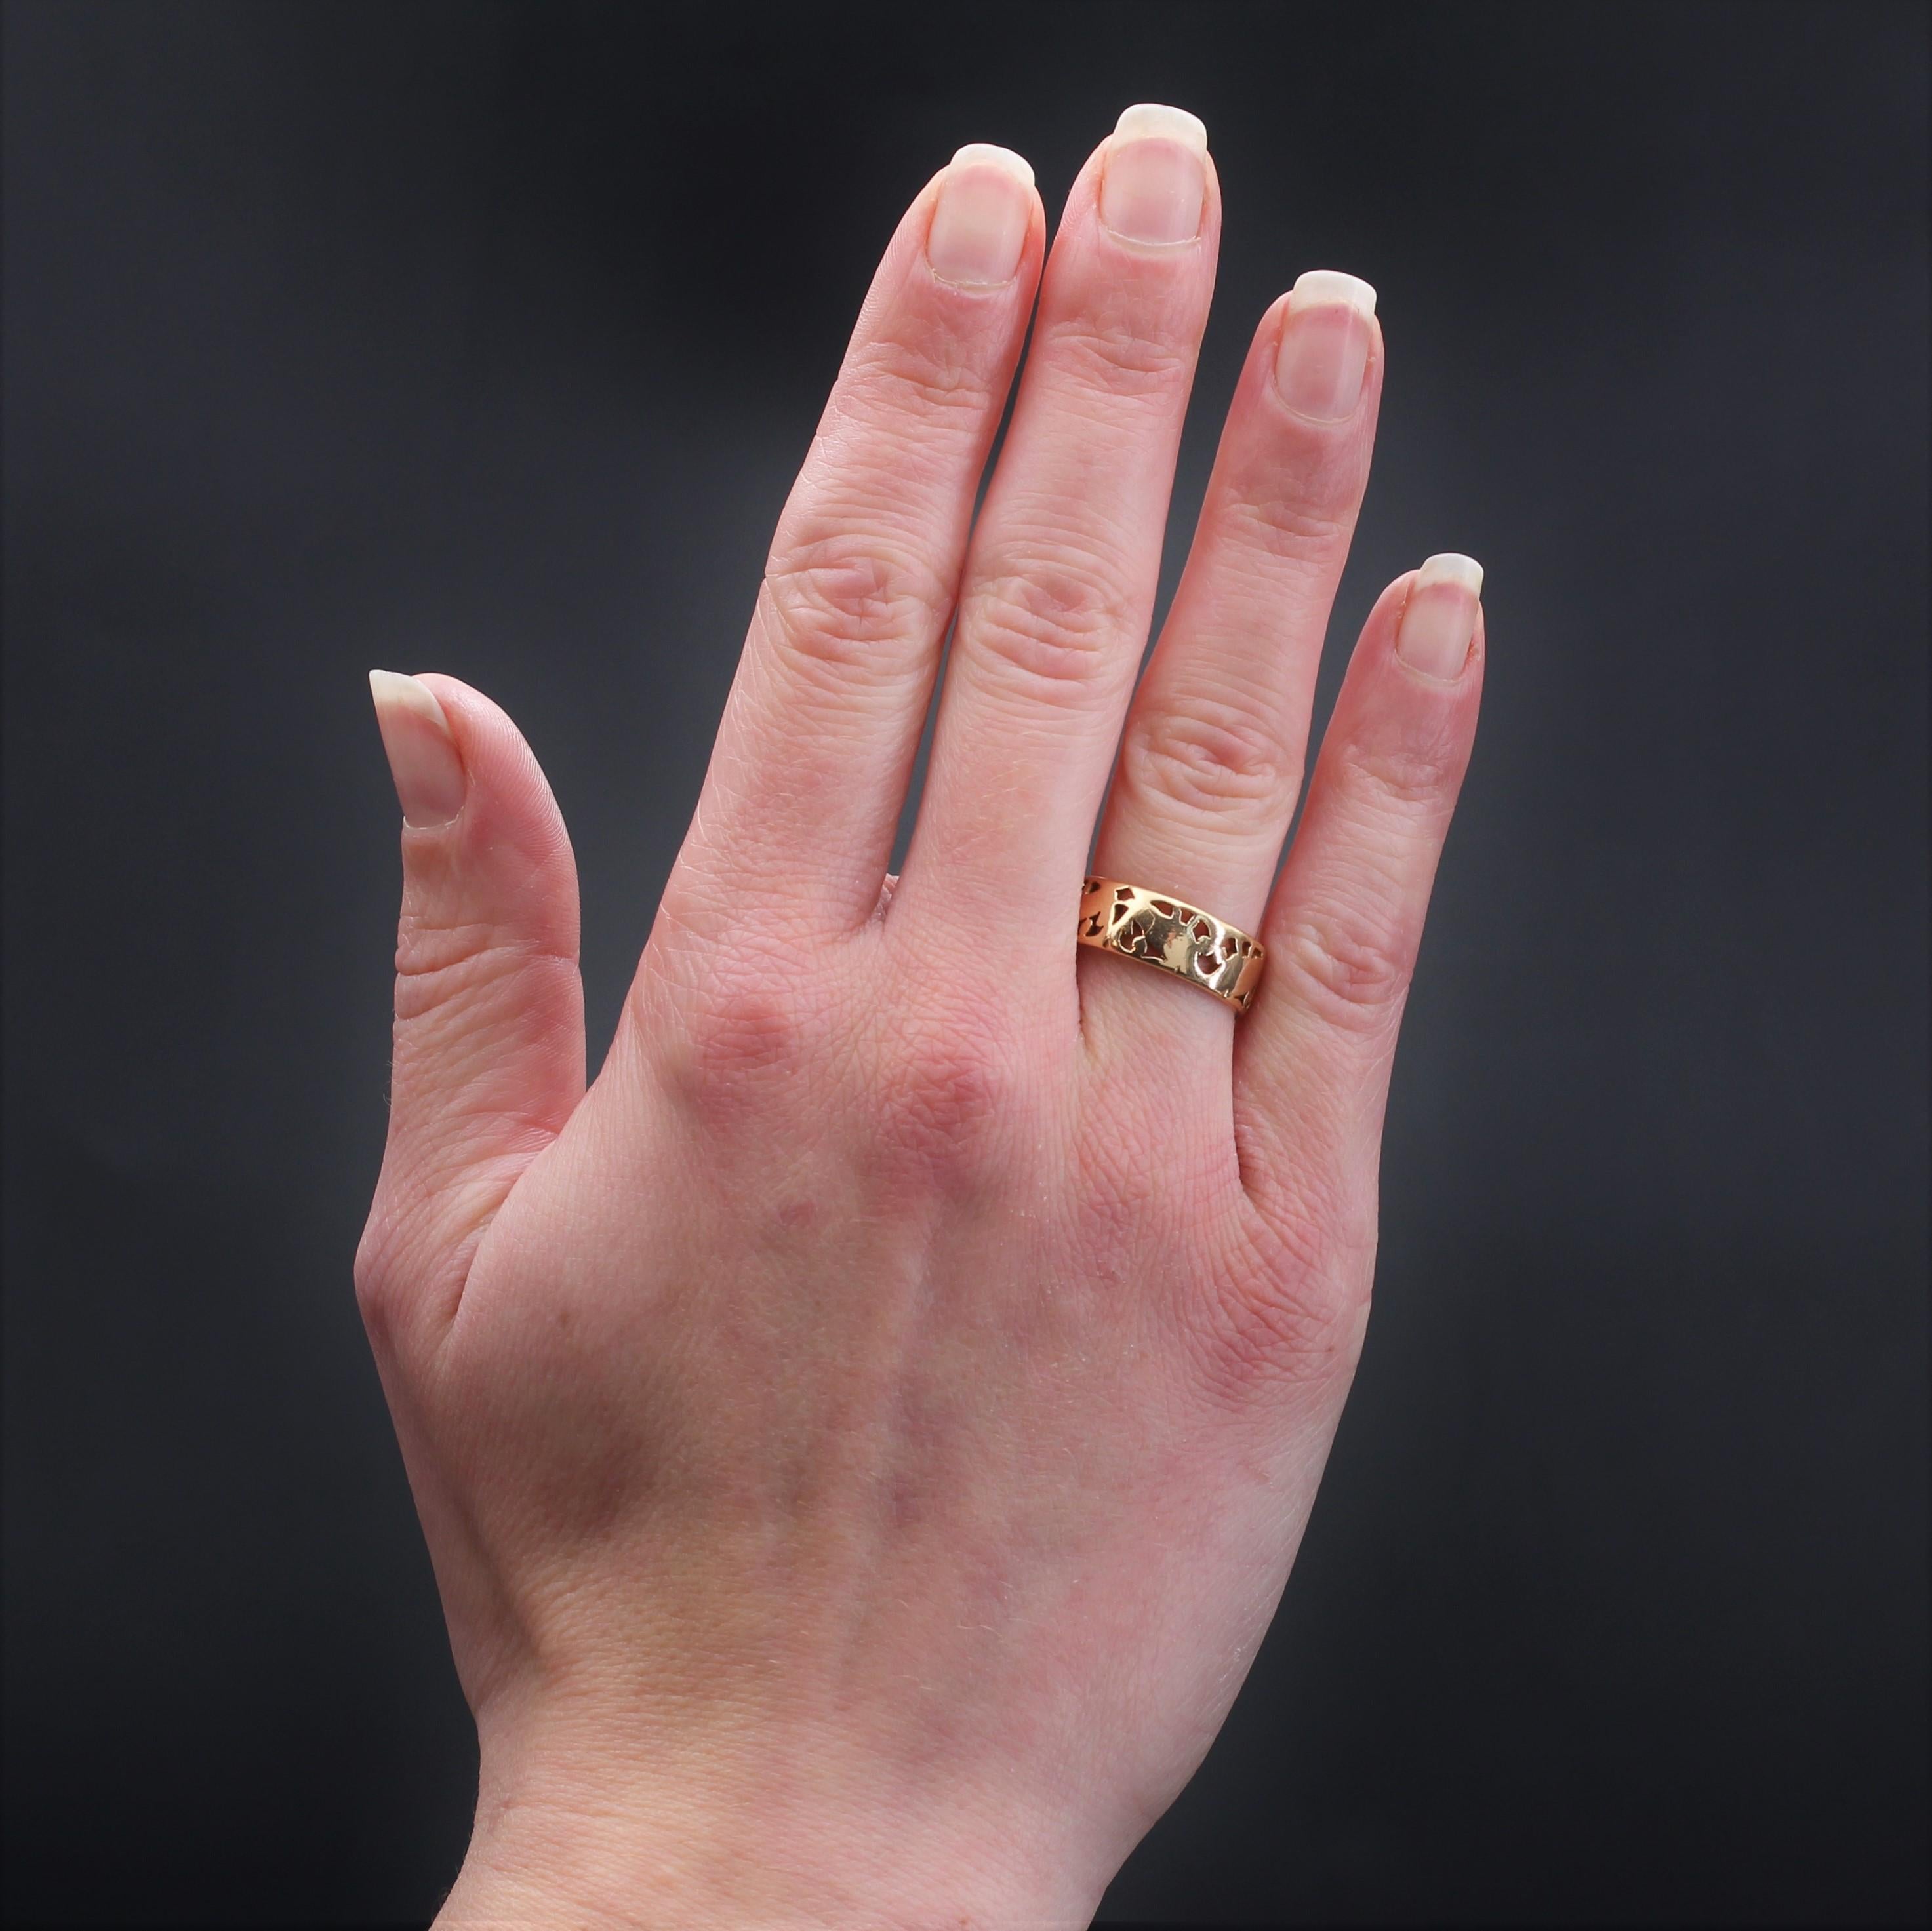  Ring in 18 karat rose gold.
Antique gold ring, it is decorated with an openwork pattern.
Width : 6,8 mm, thickness : 0,8 mm approximately.
Total weight of the jewel : 5,4 g approximately.
US Size : 7,5 ; No resize.
Authentic antique jewel - Work of